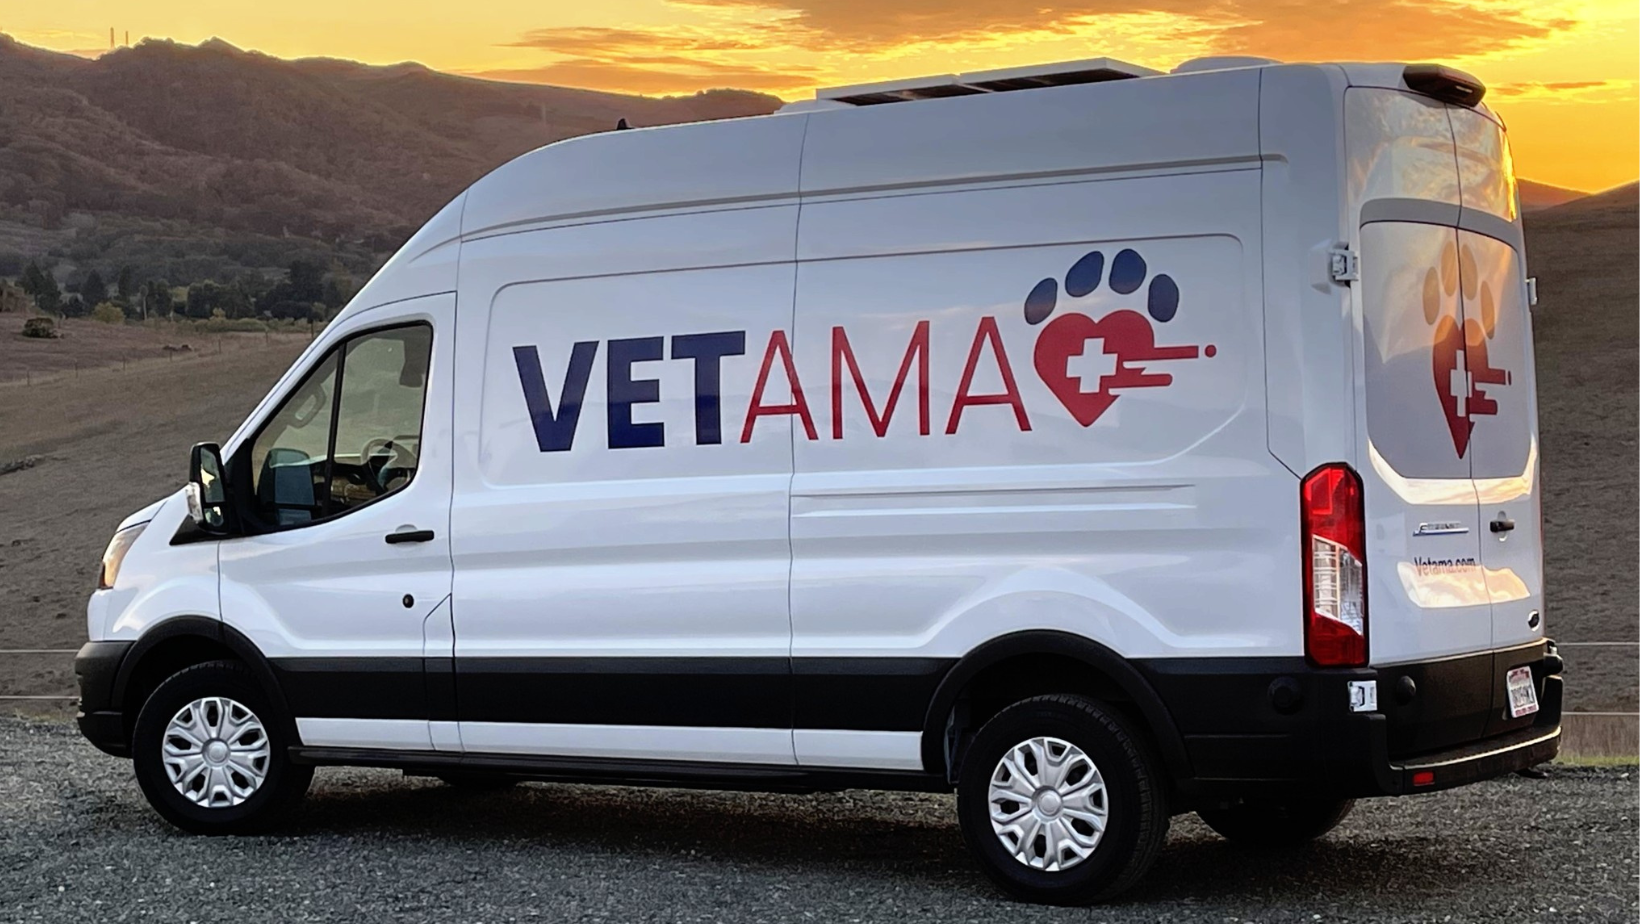 A photo of a van with the Vetama logo parked in front of a sunset.